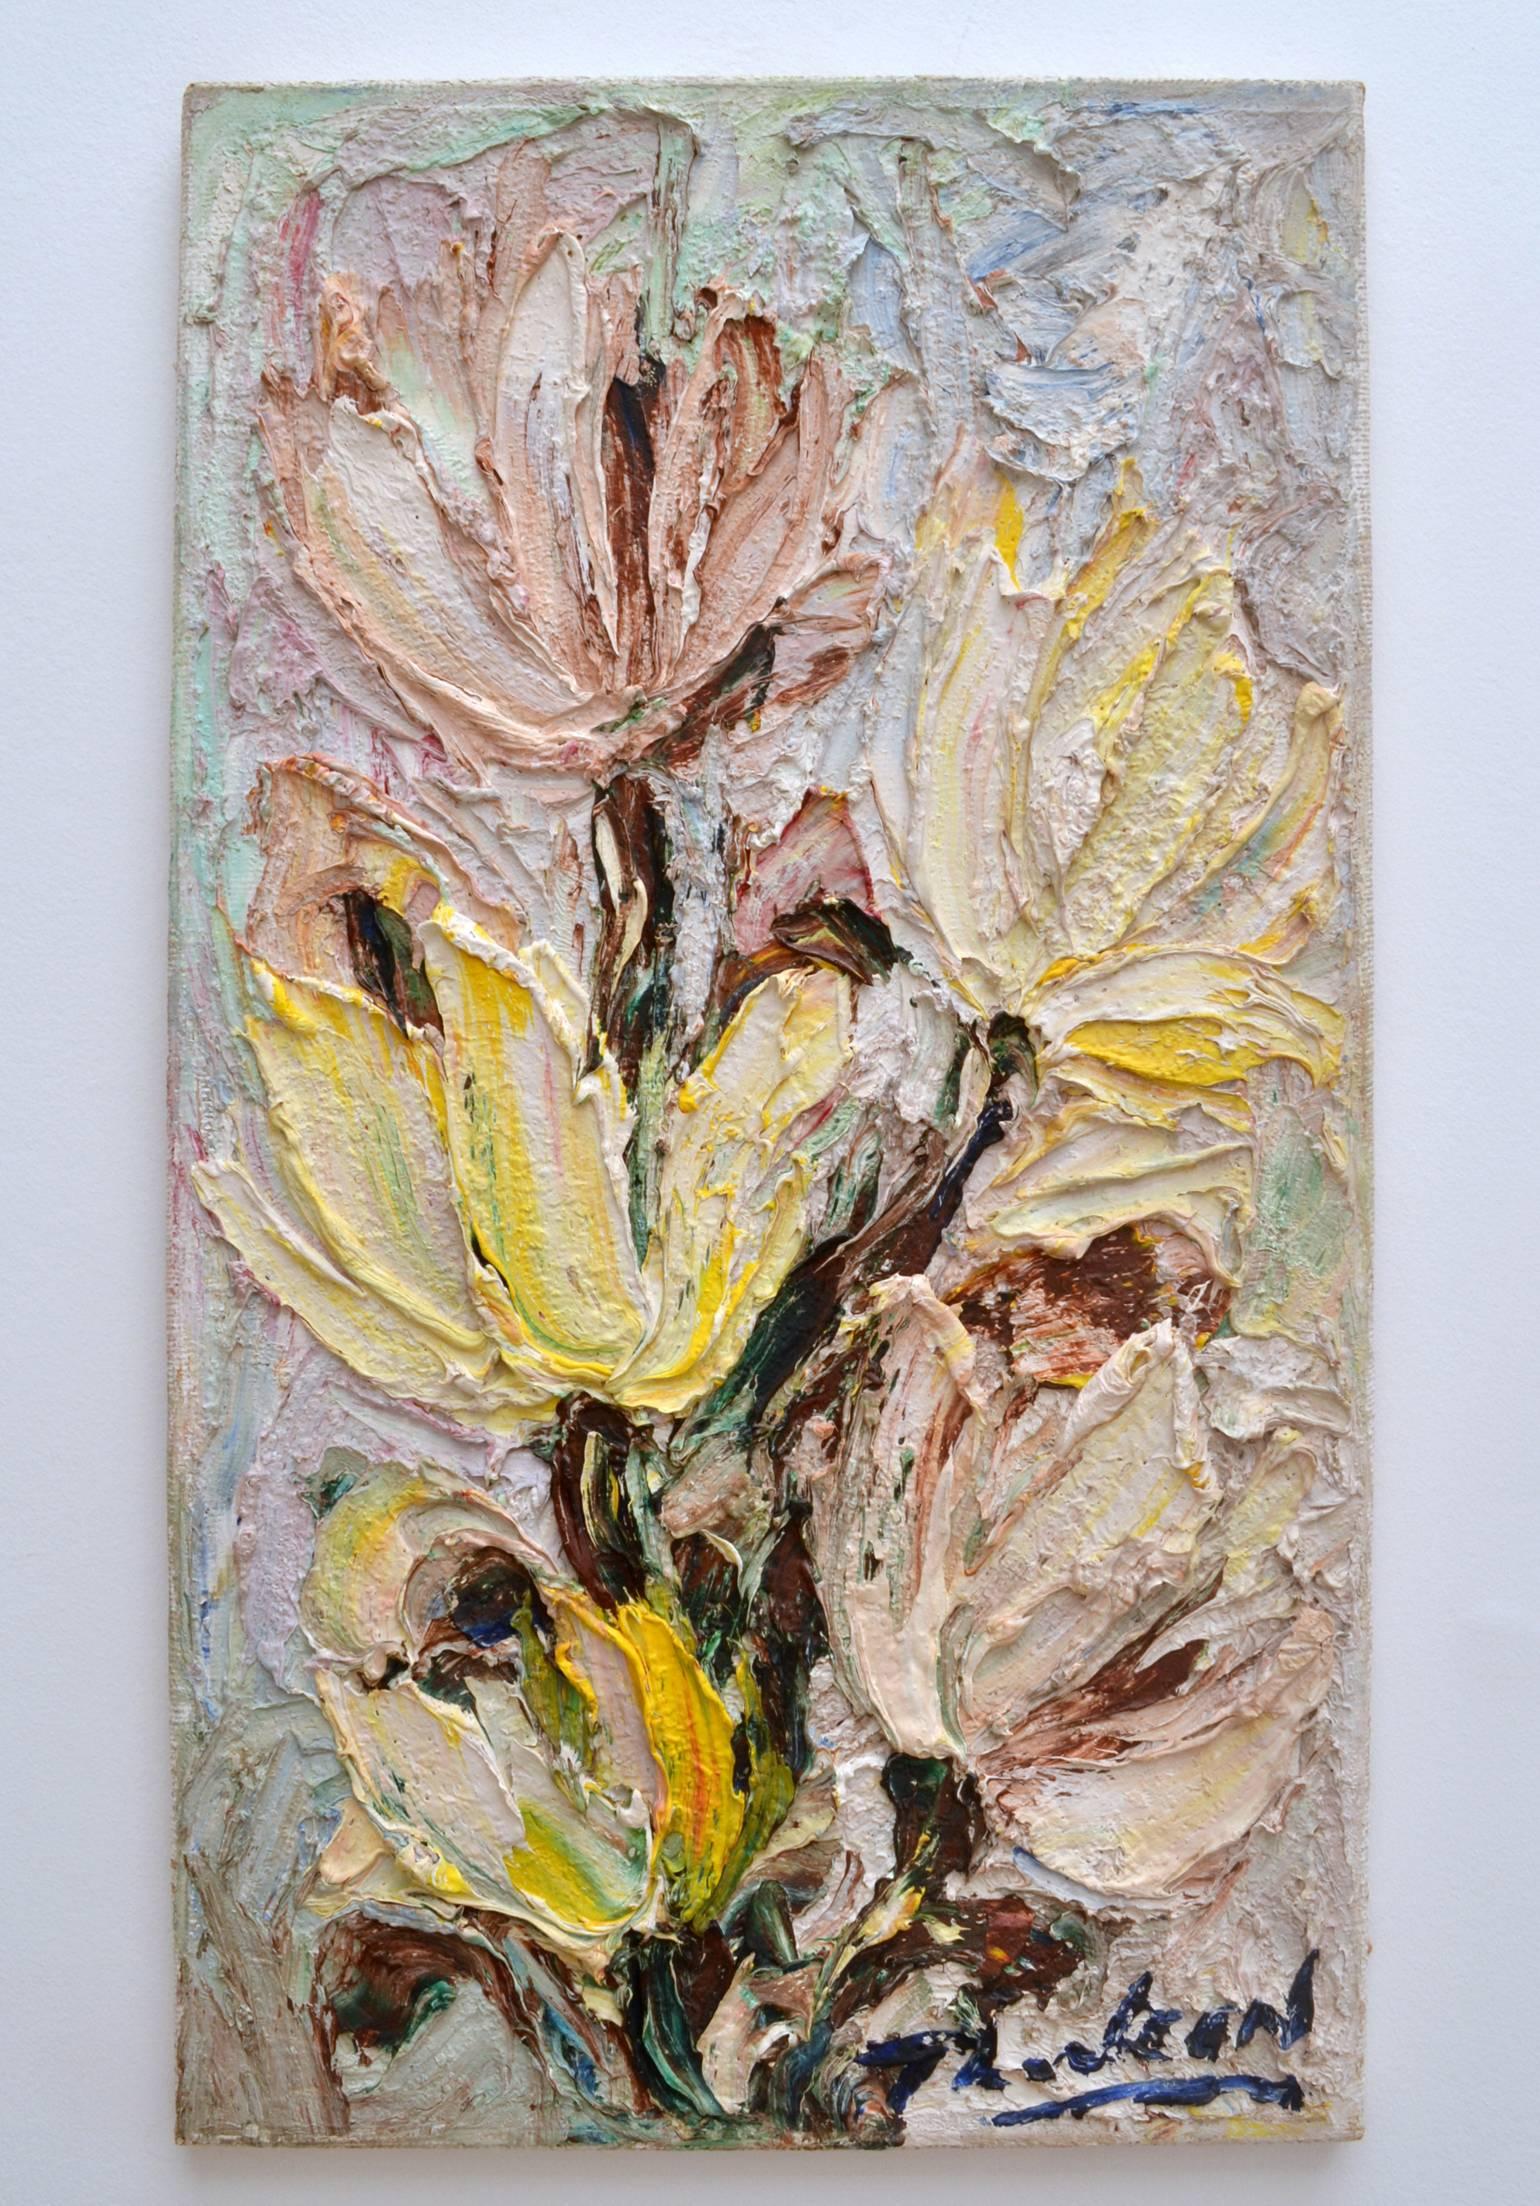 One of a pair of expressive tulip paintings in pastel colors with vibrant yellow, painted almost in a relief that makes the flowers tactile and lifely. This texture of the paint laid on thick remind me of the paintings by Frank Auerbach.
The